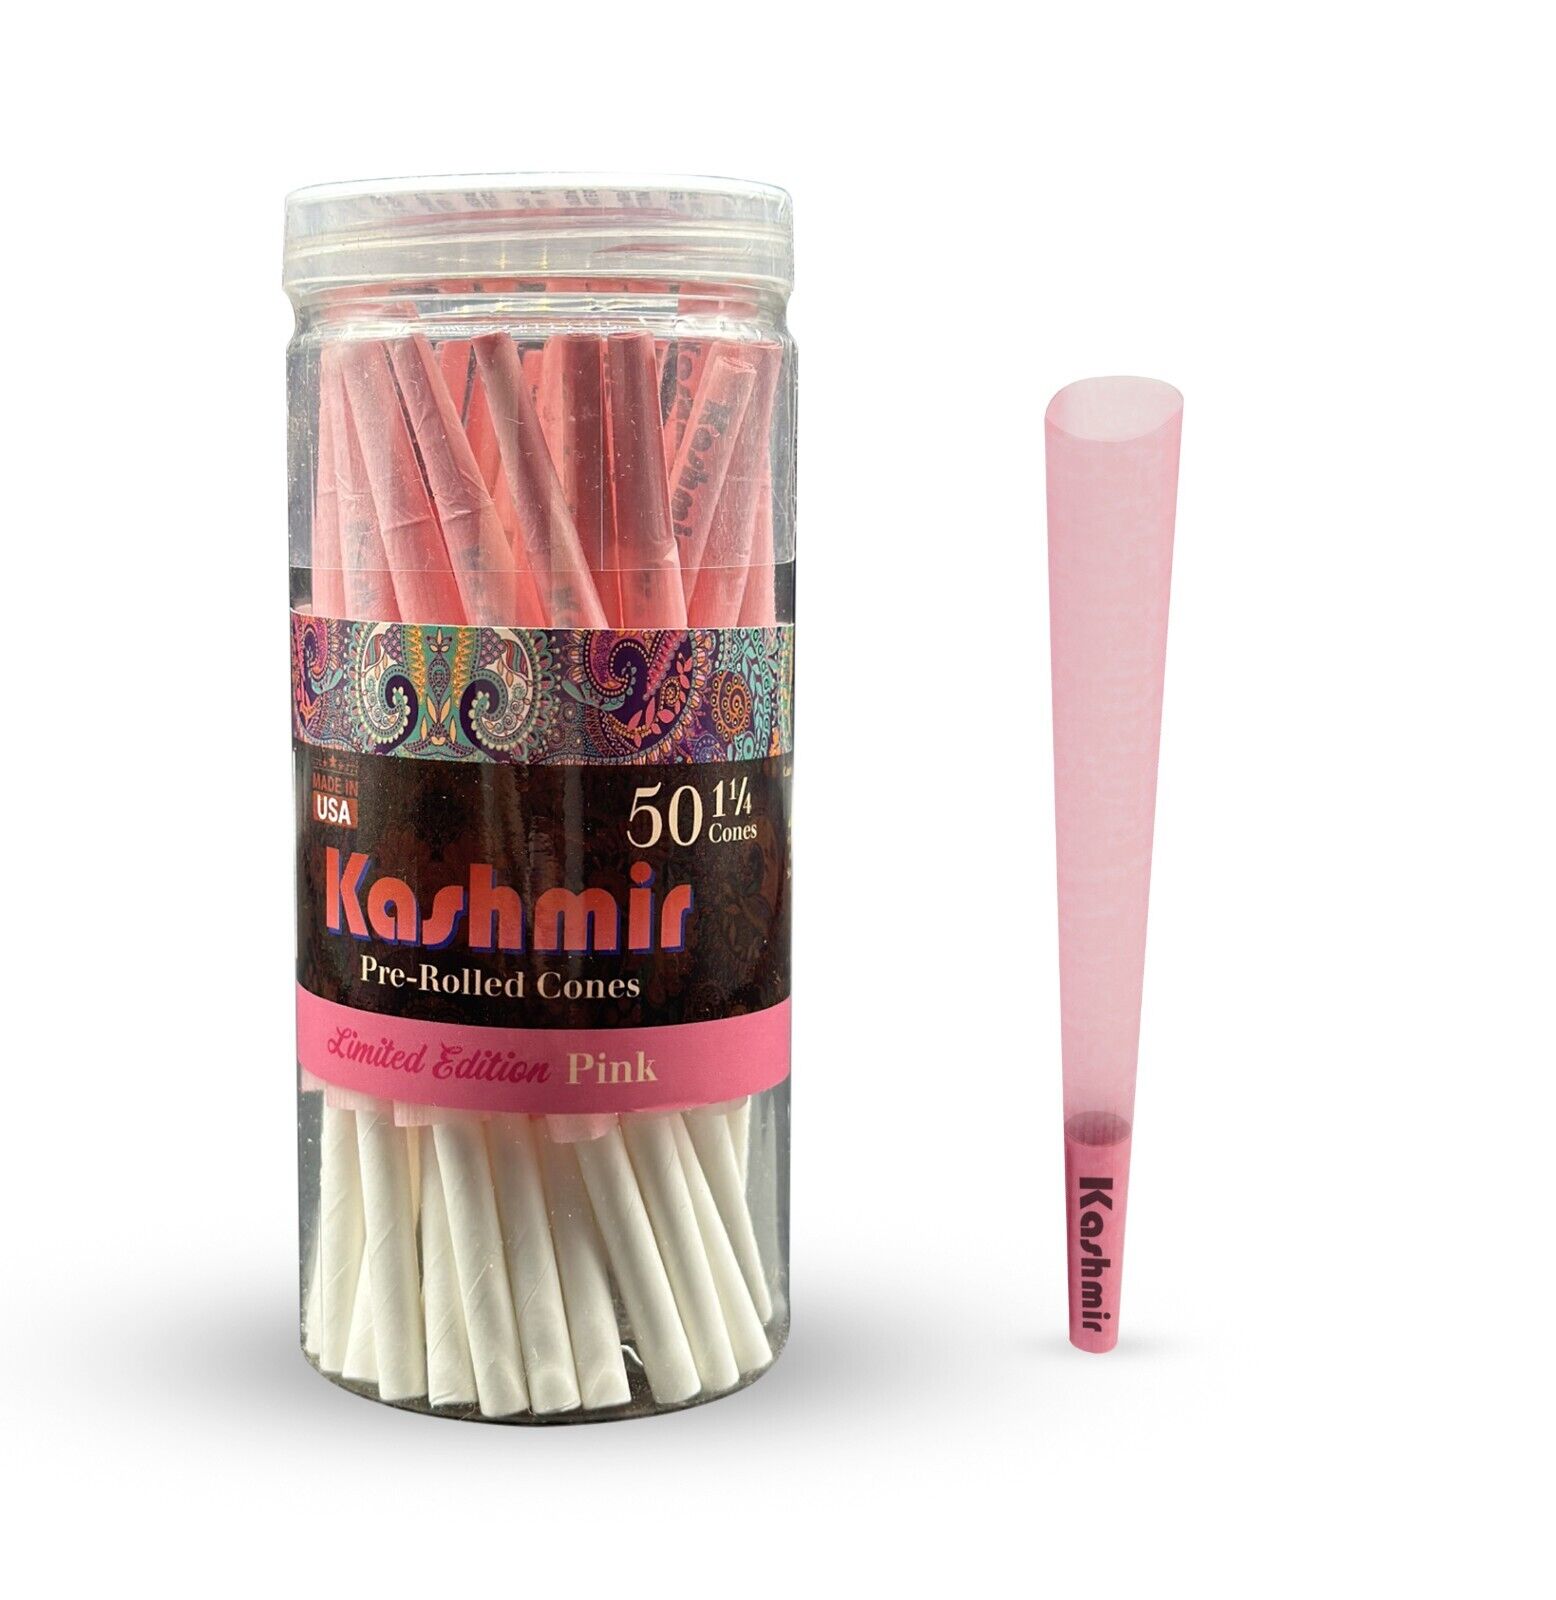 Kashmir Pre Rolled Cones 1 1/4 Pink Natural Rolling Papers 50 Ct in Jar+ Ashtray